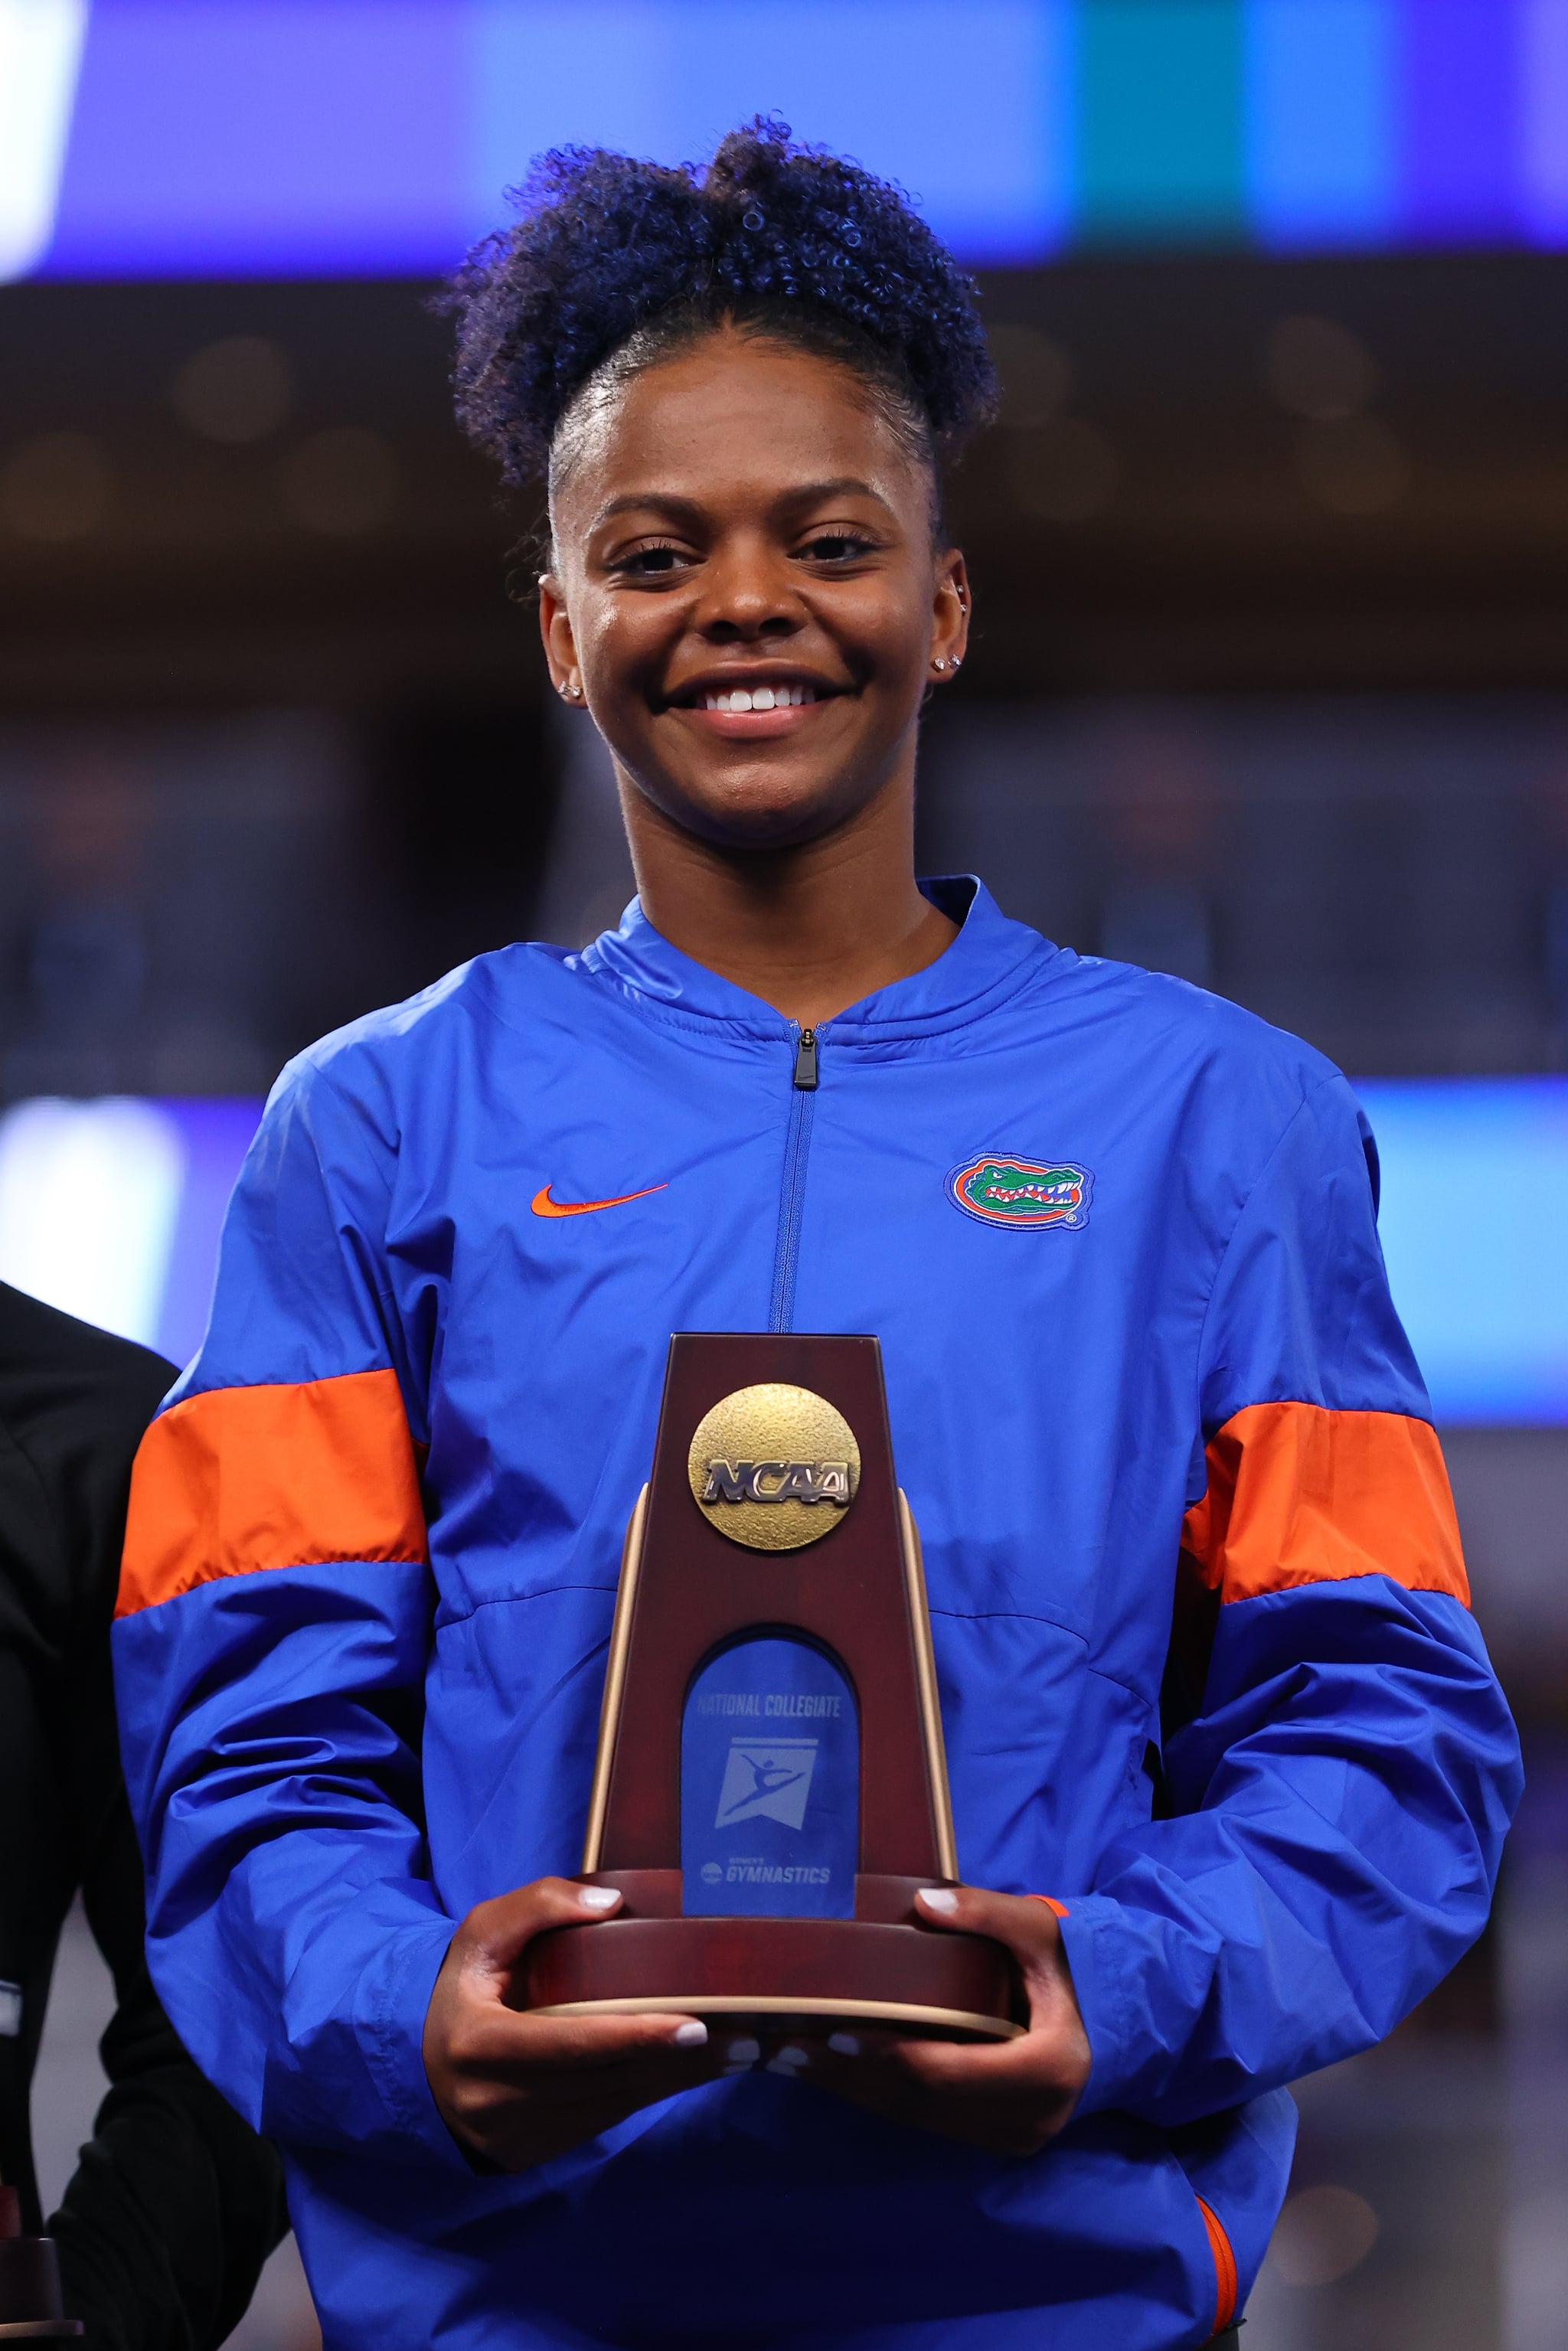 FORT WORTH, TX - APRIL 14: Trinity Thomas of the Florida Gators wins the national championship in uneven bars during the Division I Womens Gymnastics Championship held at Dickies Arena on April 14, 2022 in Fort Worth, Texas. (Photo by C. Morgan Engel/NCAA Photos via Getty Images)